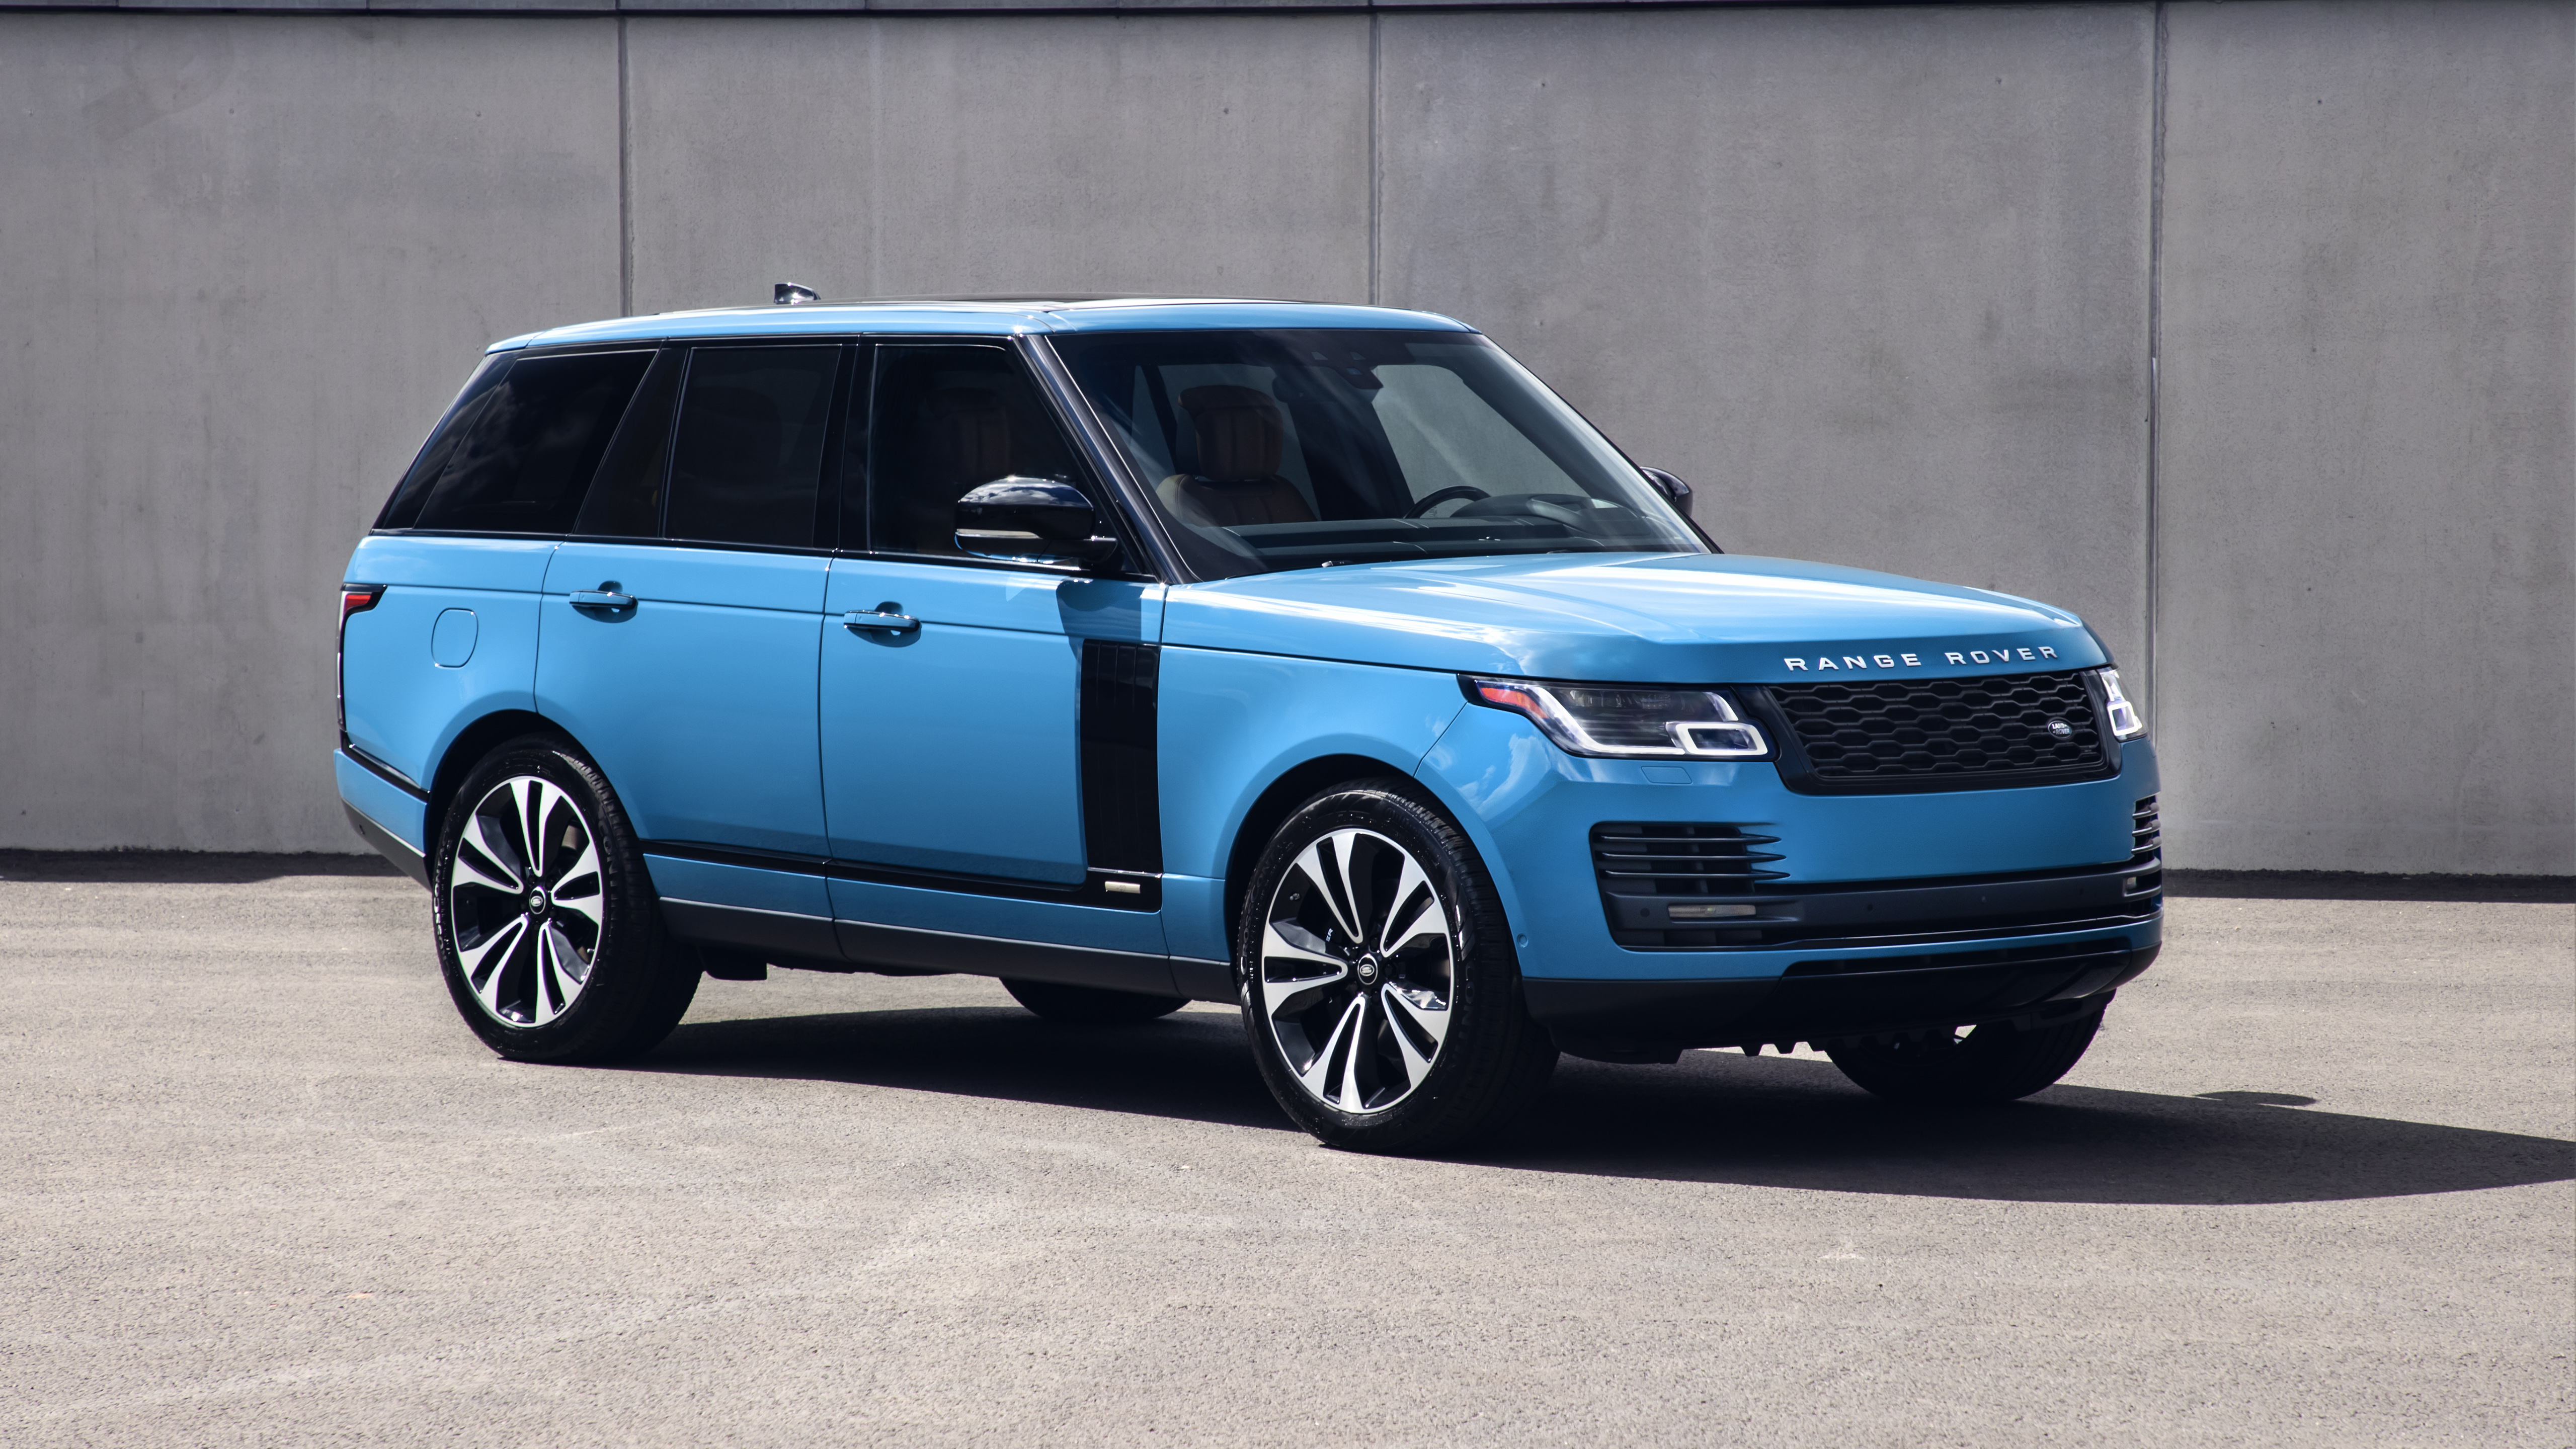 Range Rover Autobiography Fifty 2020 5K Wallpaper | HD Car Wallpapers ...